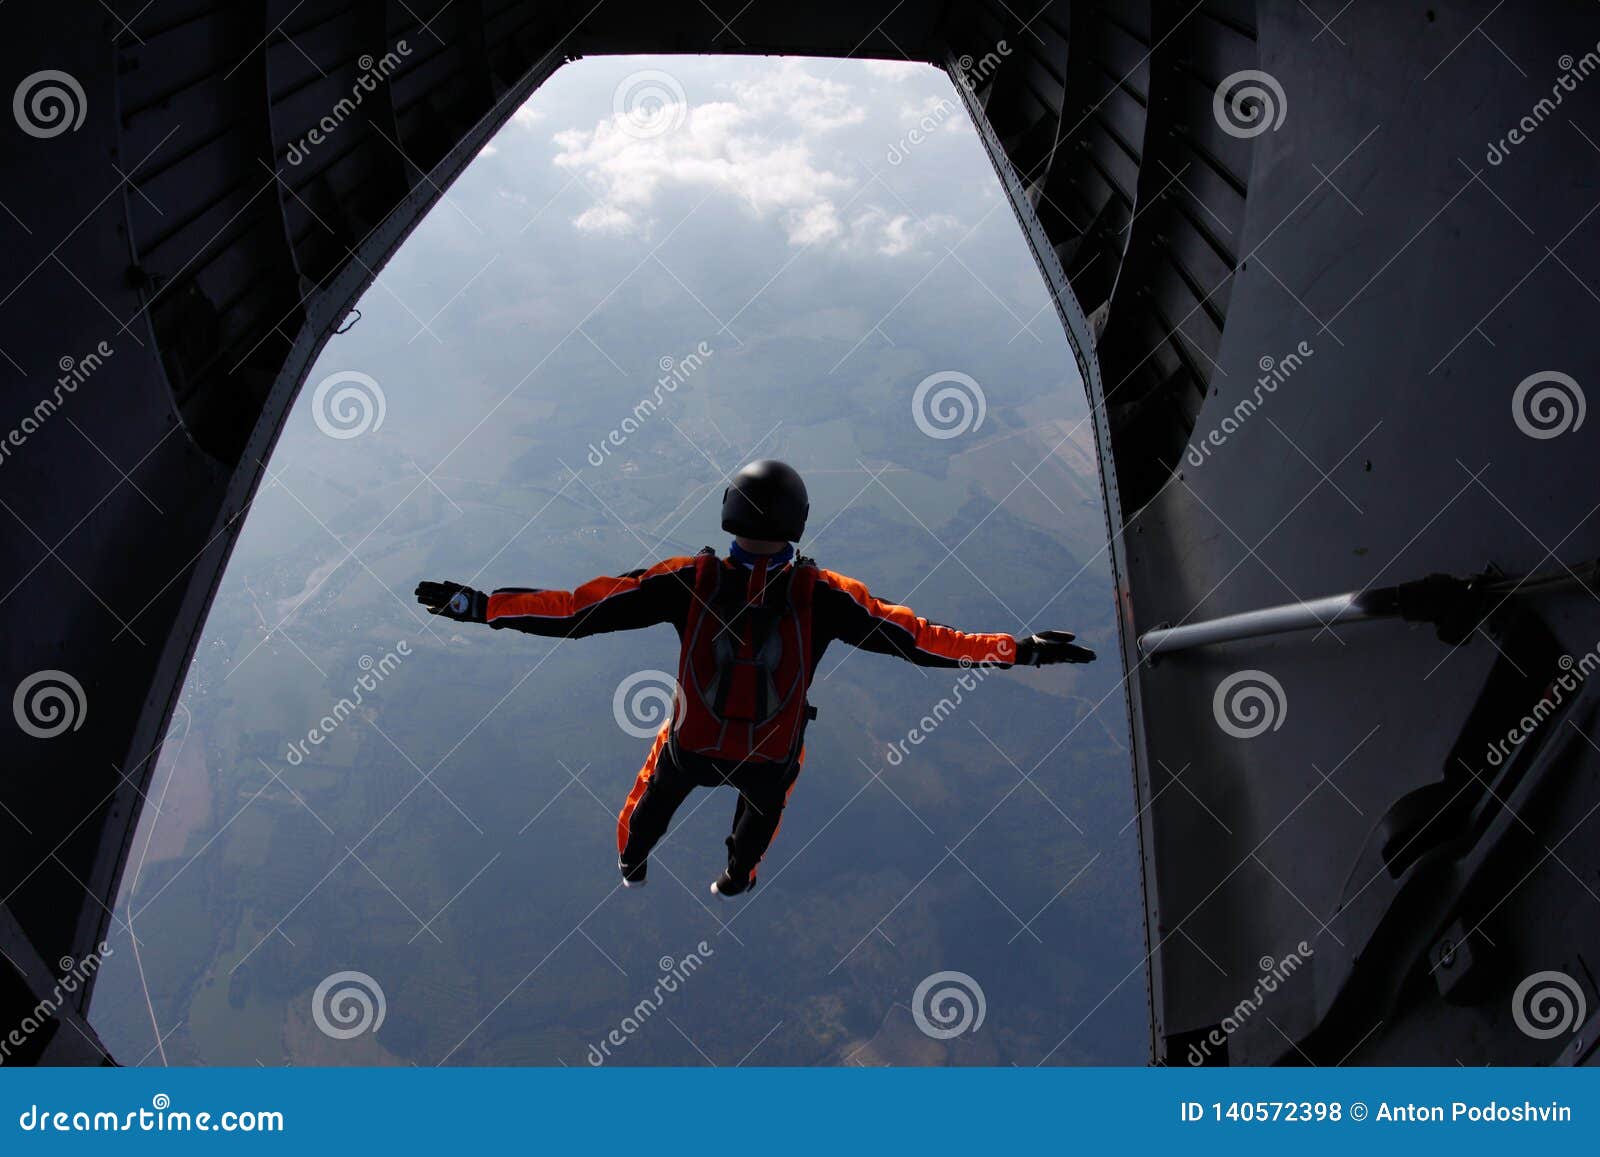 skydiving. skydiver is jumping out of a plane. the view from an airplane.